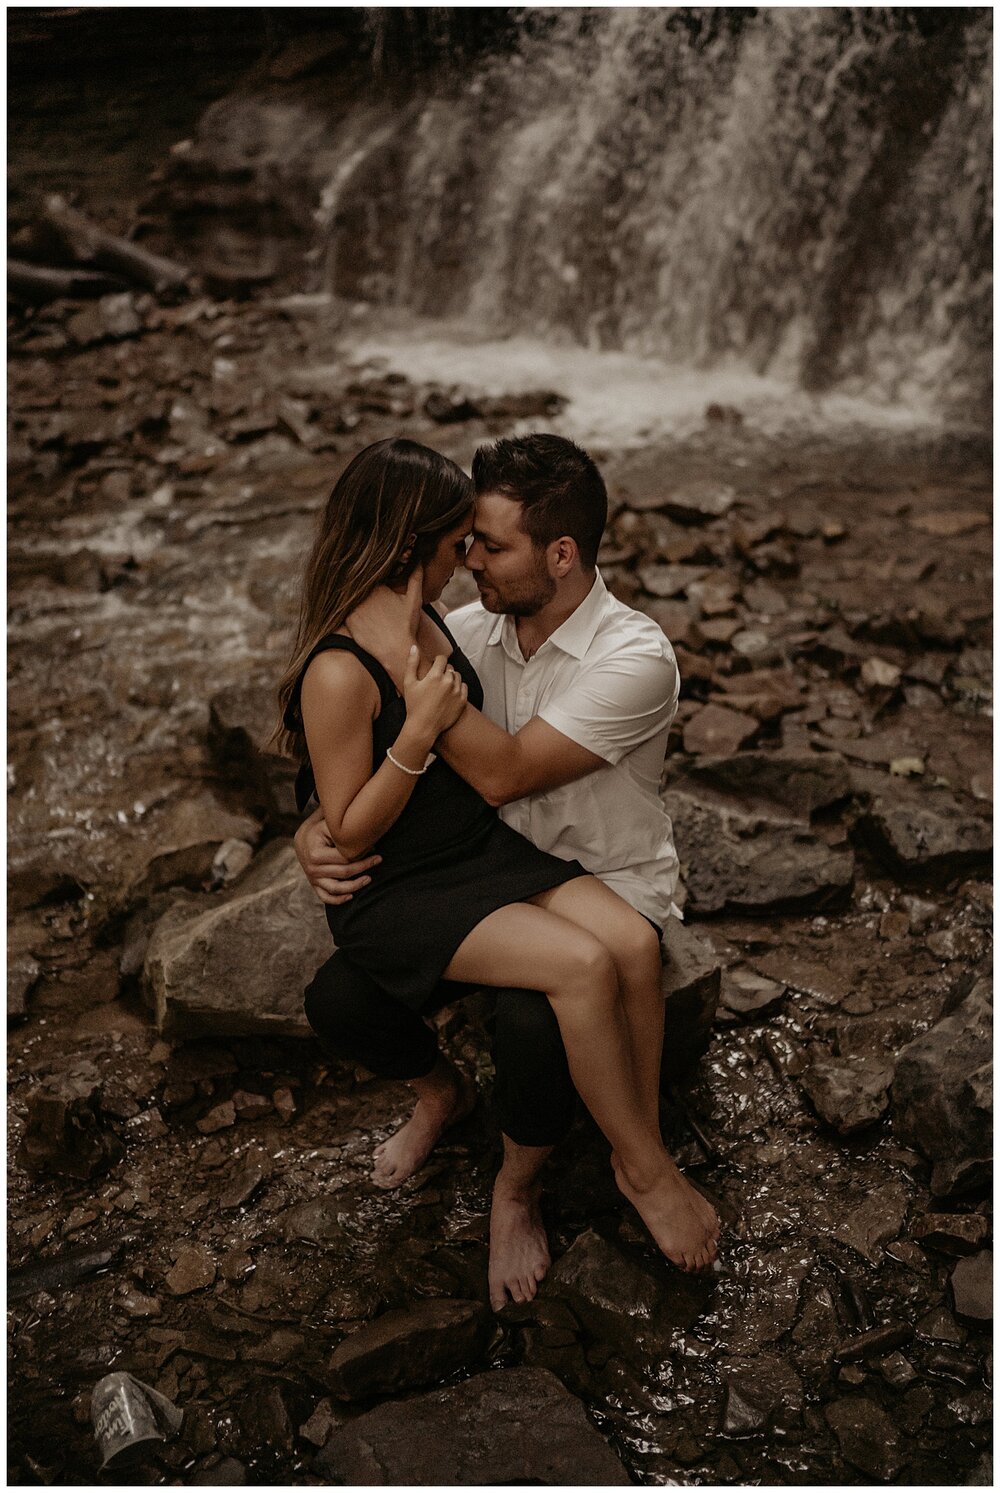 Cotton_Factory_And_Waterfall_Engagement_Session_Hamilton_Ontario_Wedding_Photographer_0113.jpg